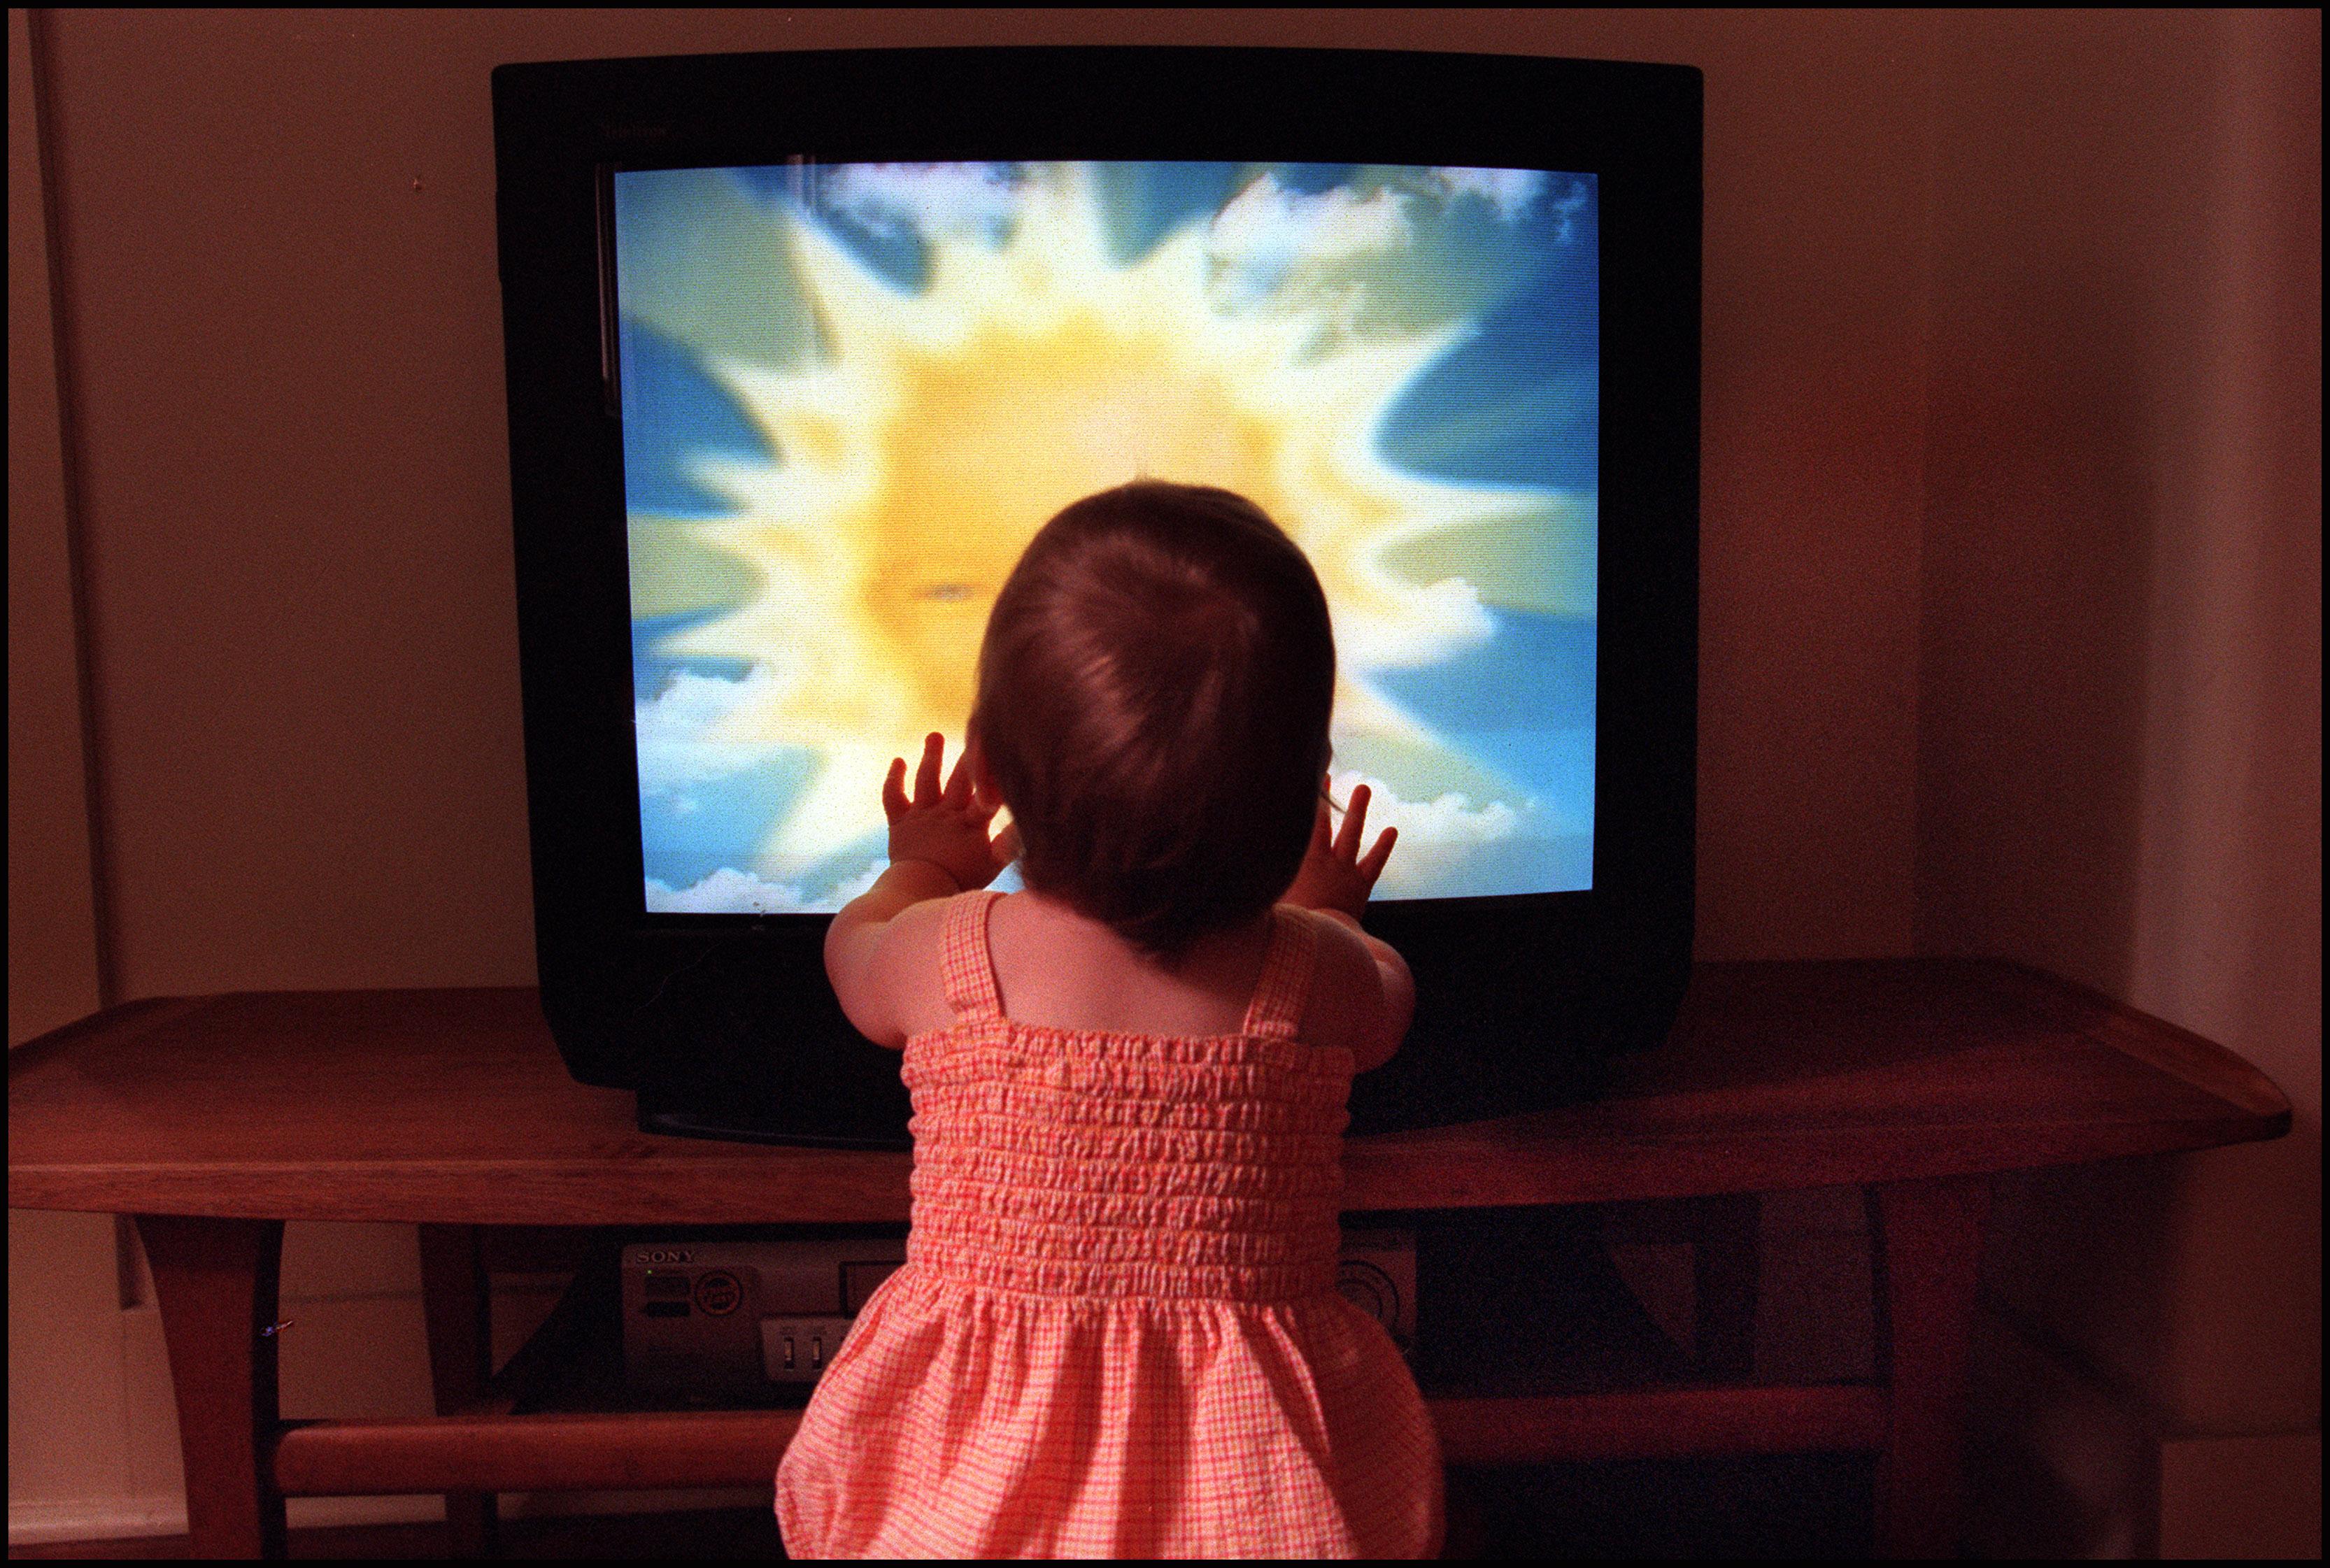 A baby watching "Teletubbies" on TV on December 28, 2001 | Source: Getty Images